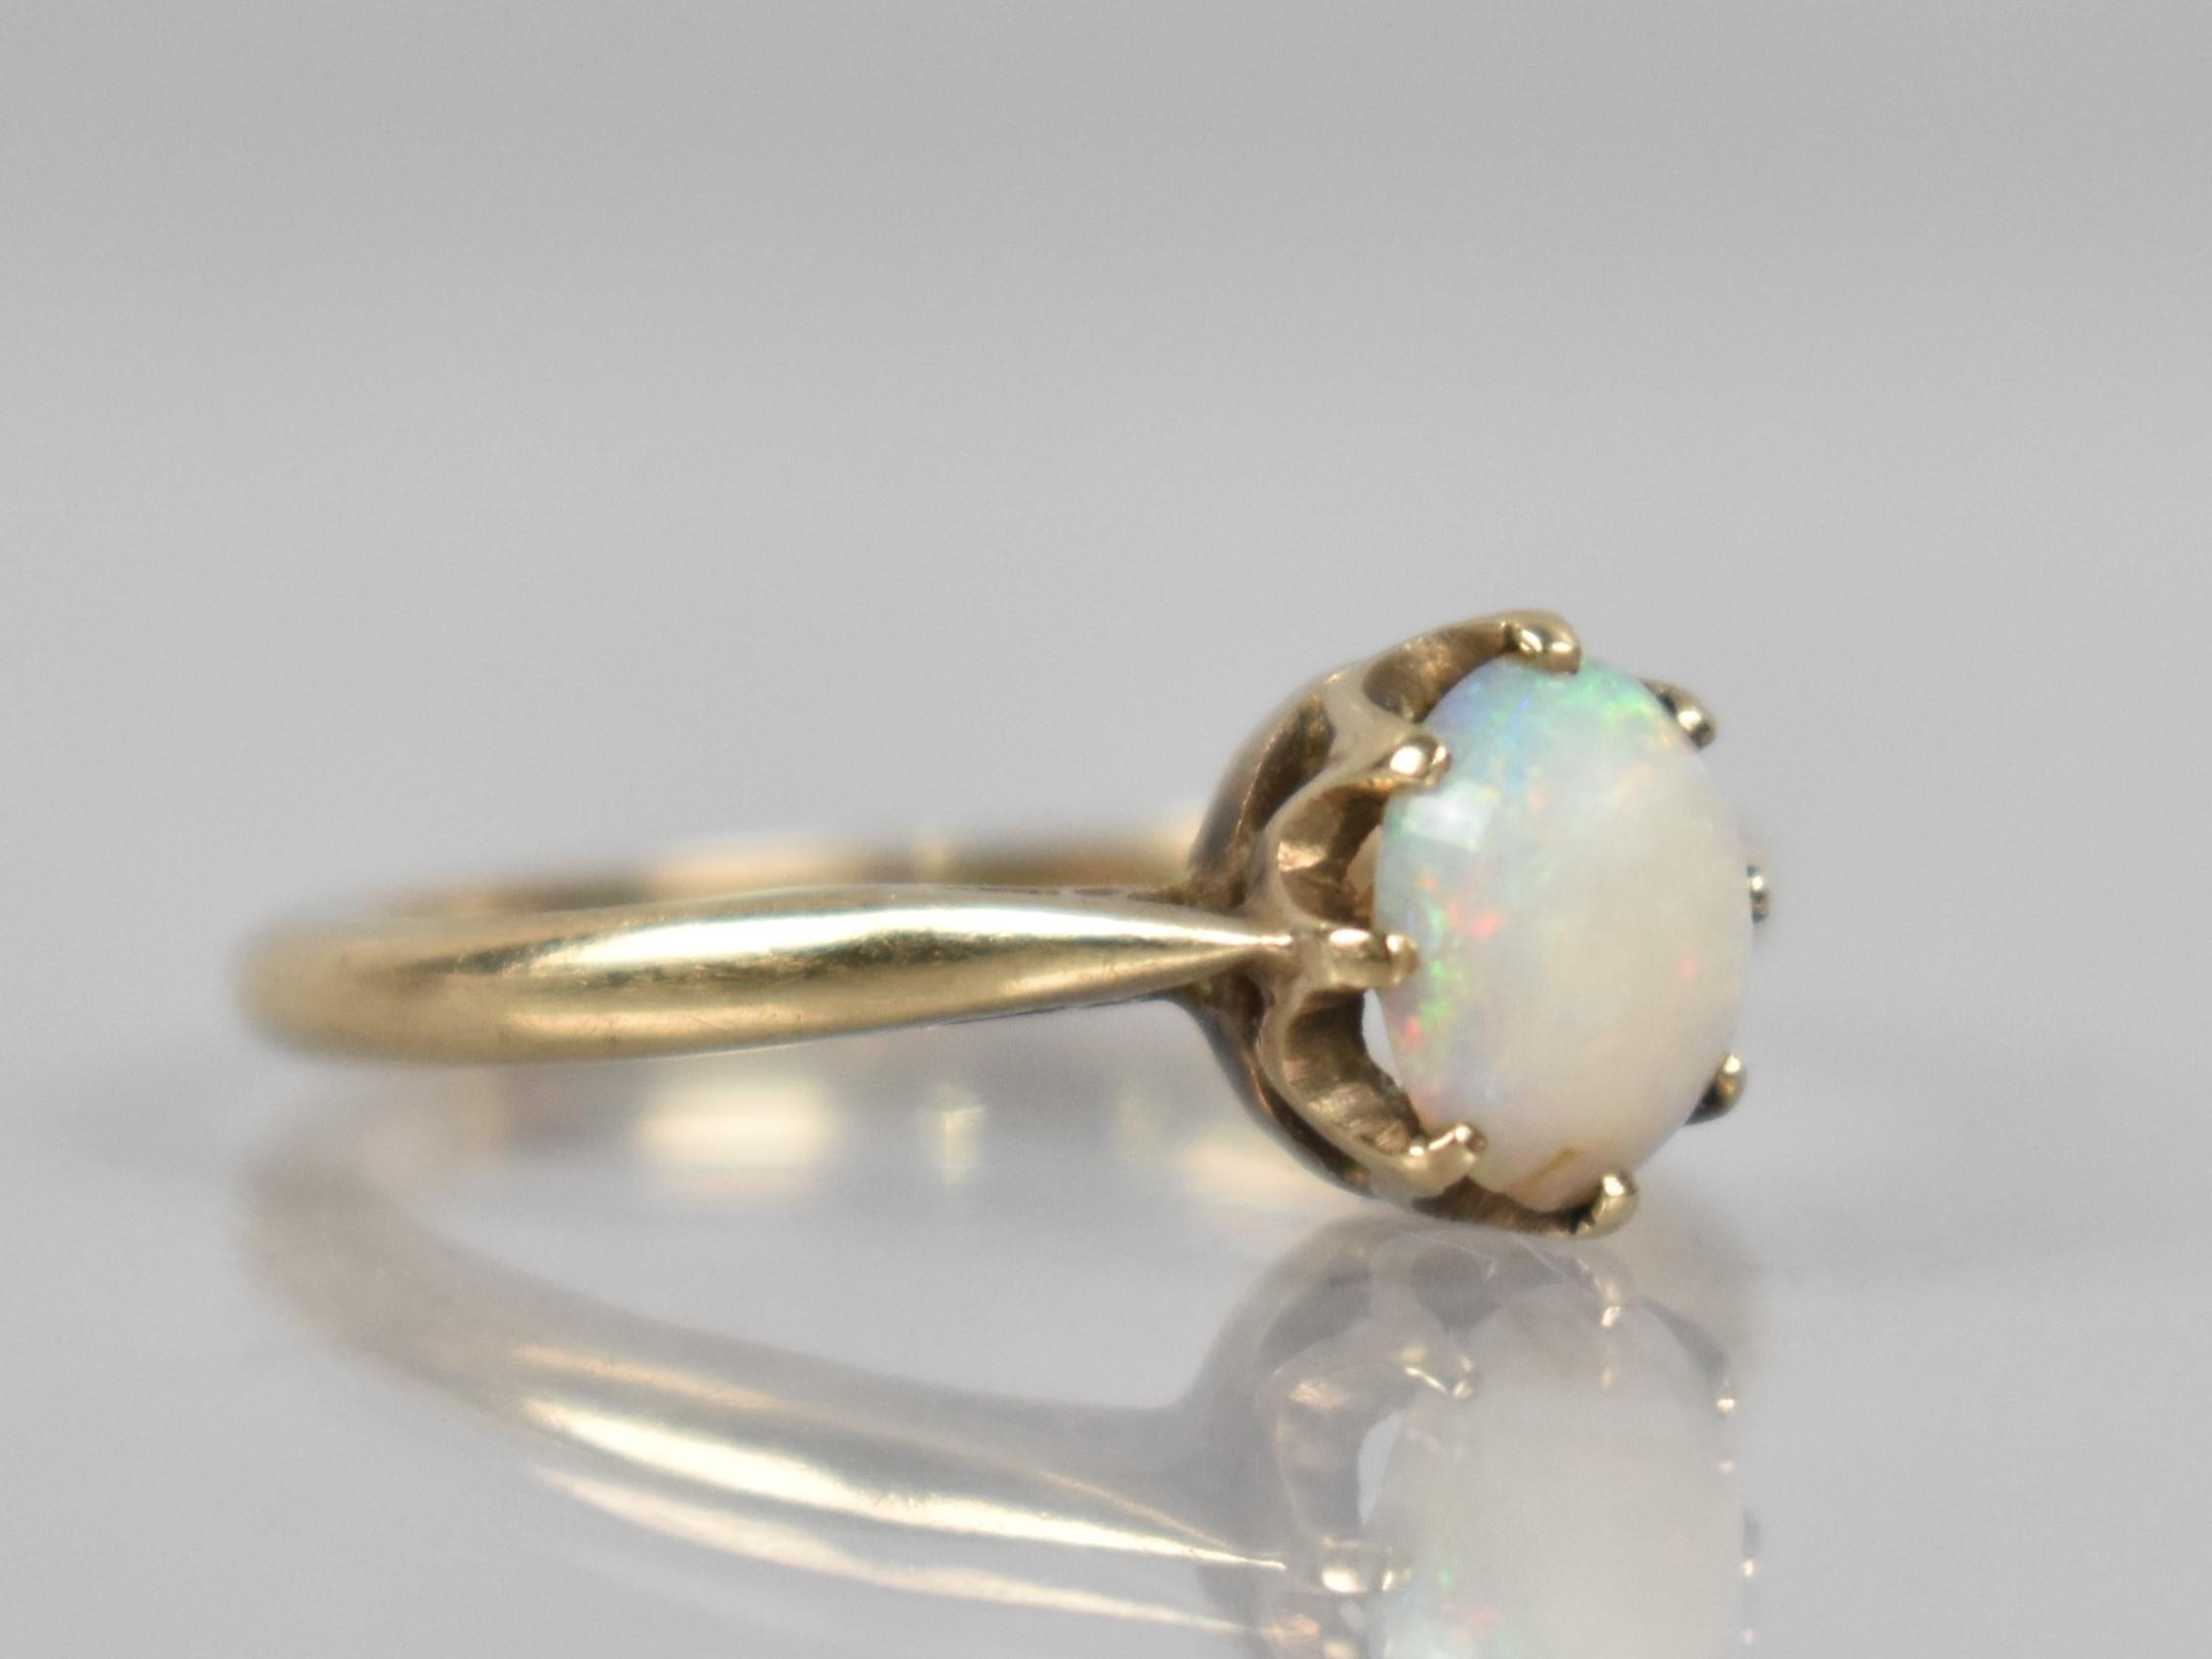 A 9ct Gold Opal Mounted Ring, Oval Cabochon Stone 7.2mm by 5.5mm, Raised in Eight Claws to Reverse - Image 4 of 4